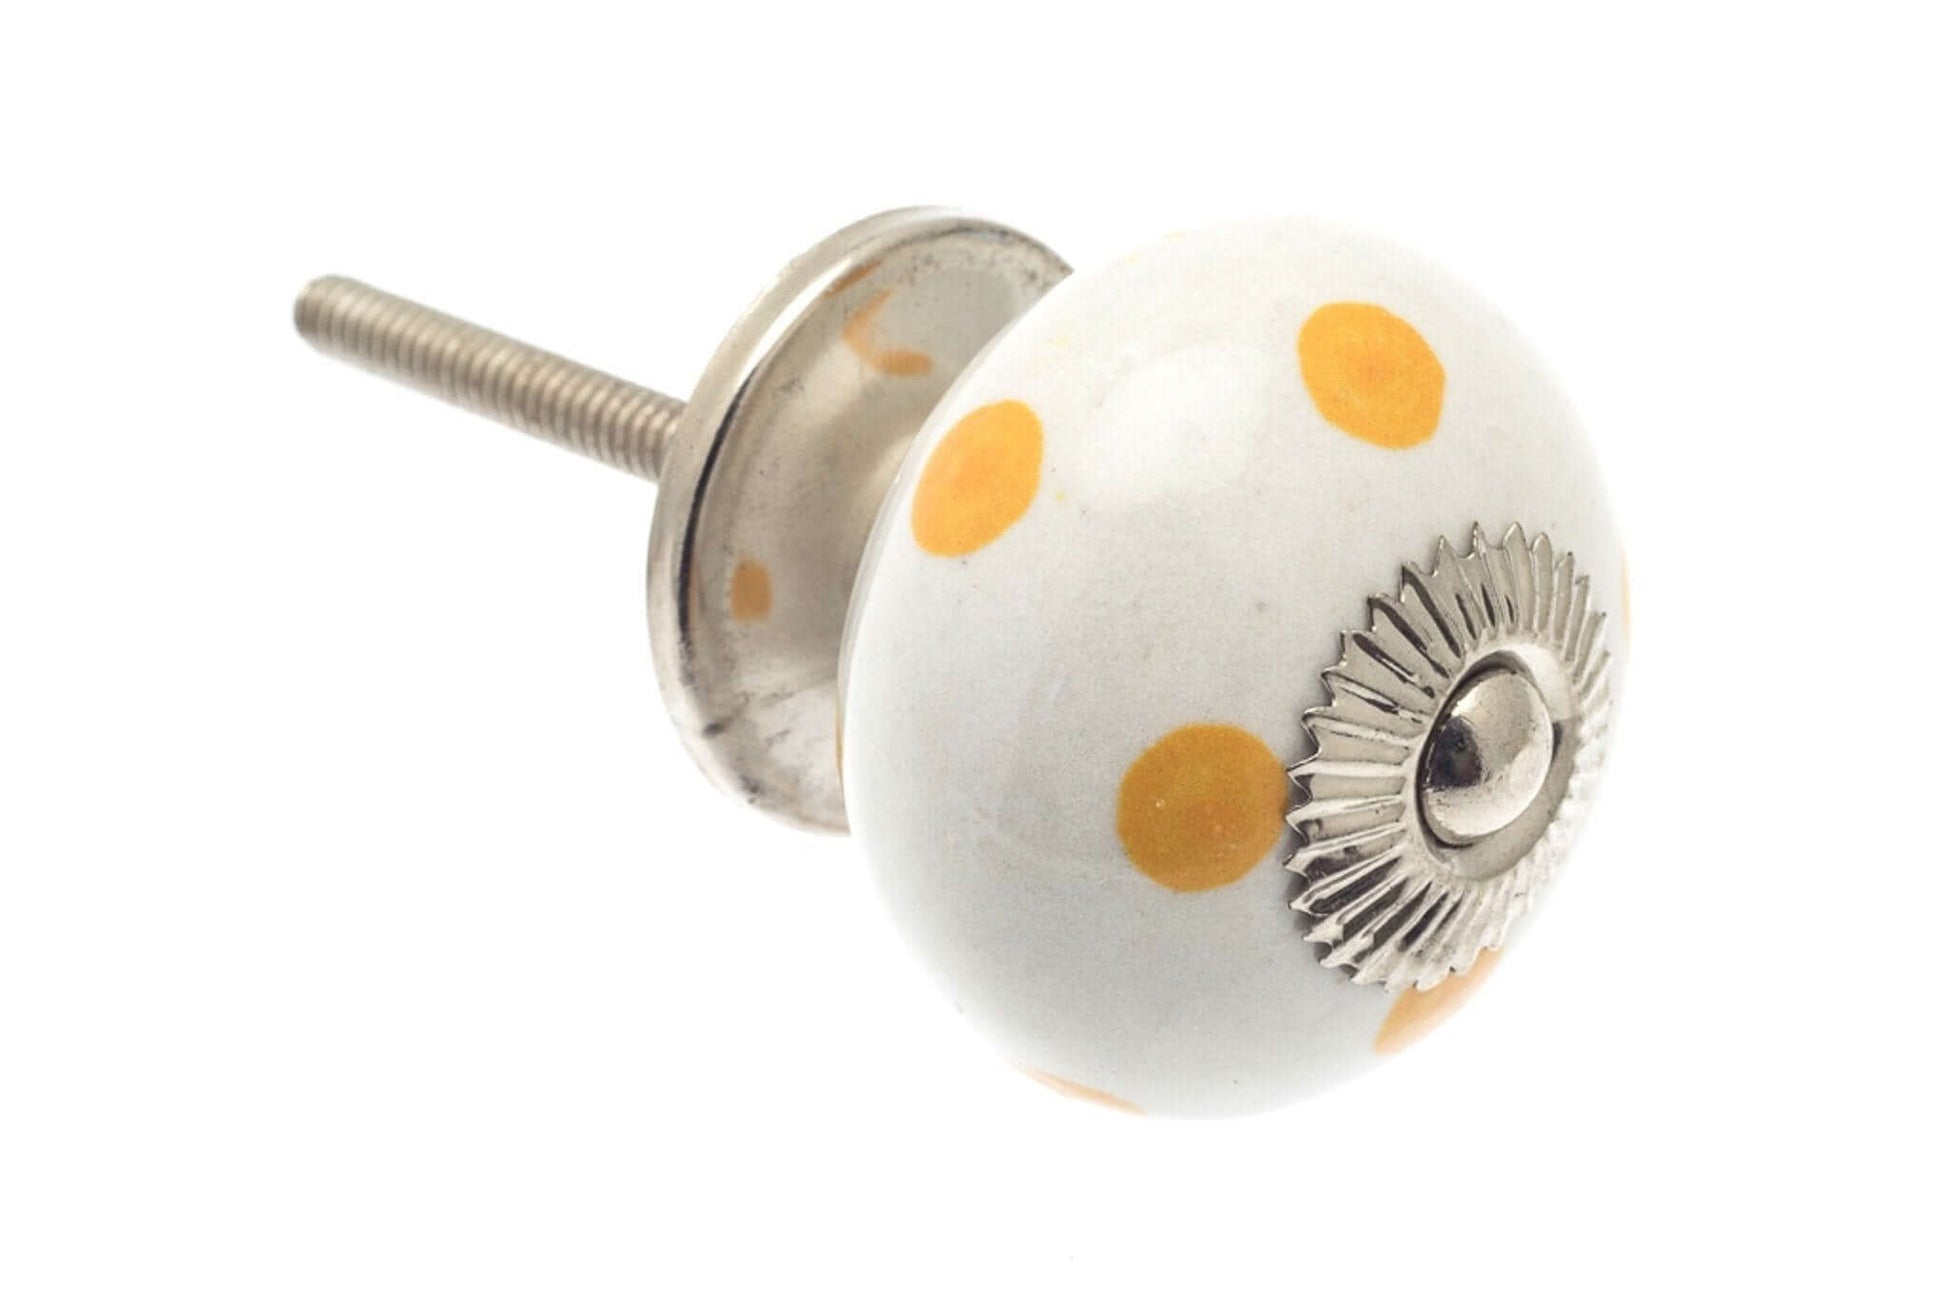 Ceramic Cupboard Knobs - Round Ceramic Knob White With Yellow Spots / Dots 40mm (MT-344)